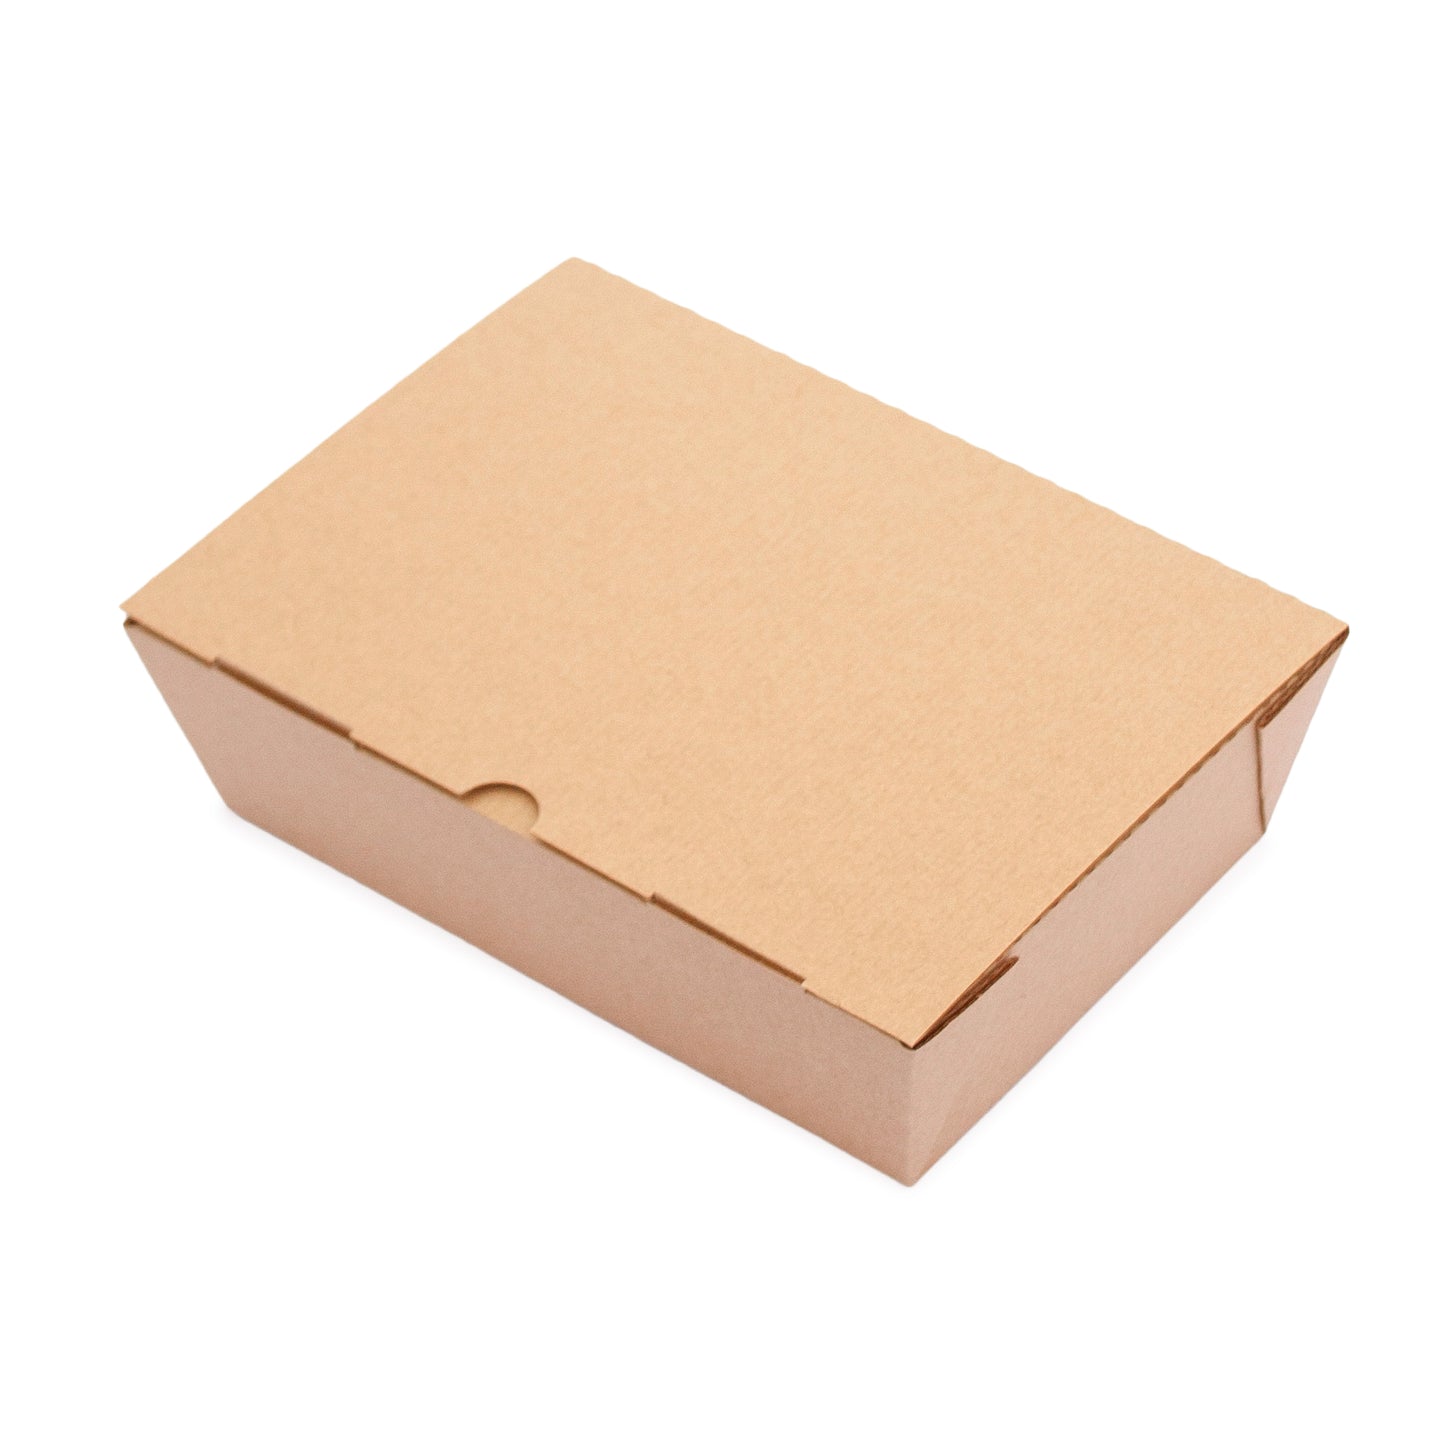 Large Food Container Take away packaging Hot food container Small Bioflute Leakproof box